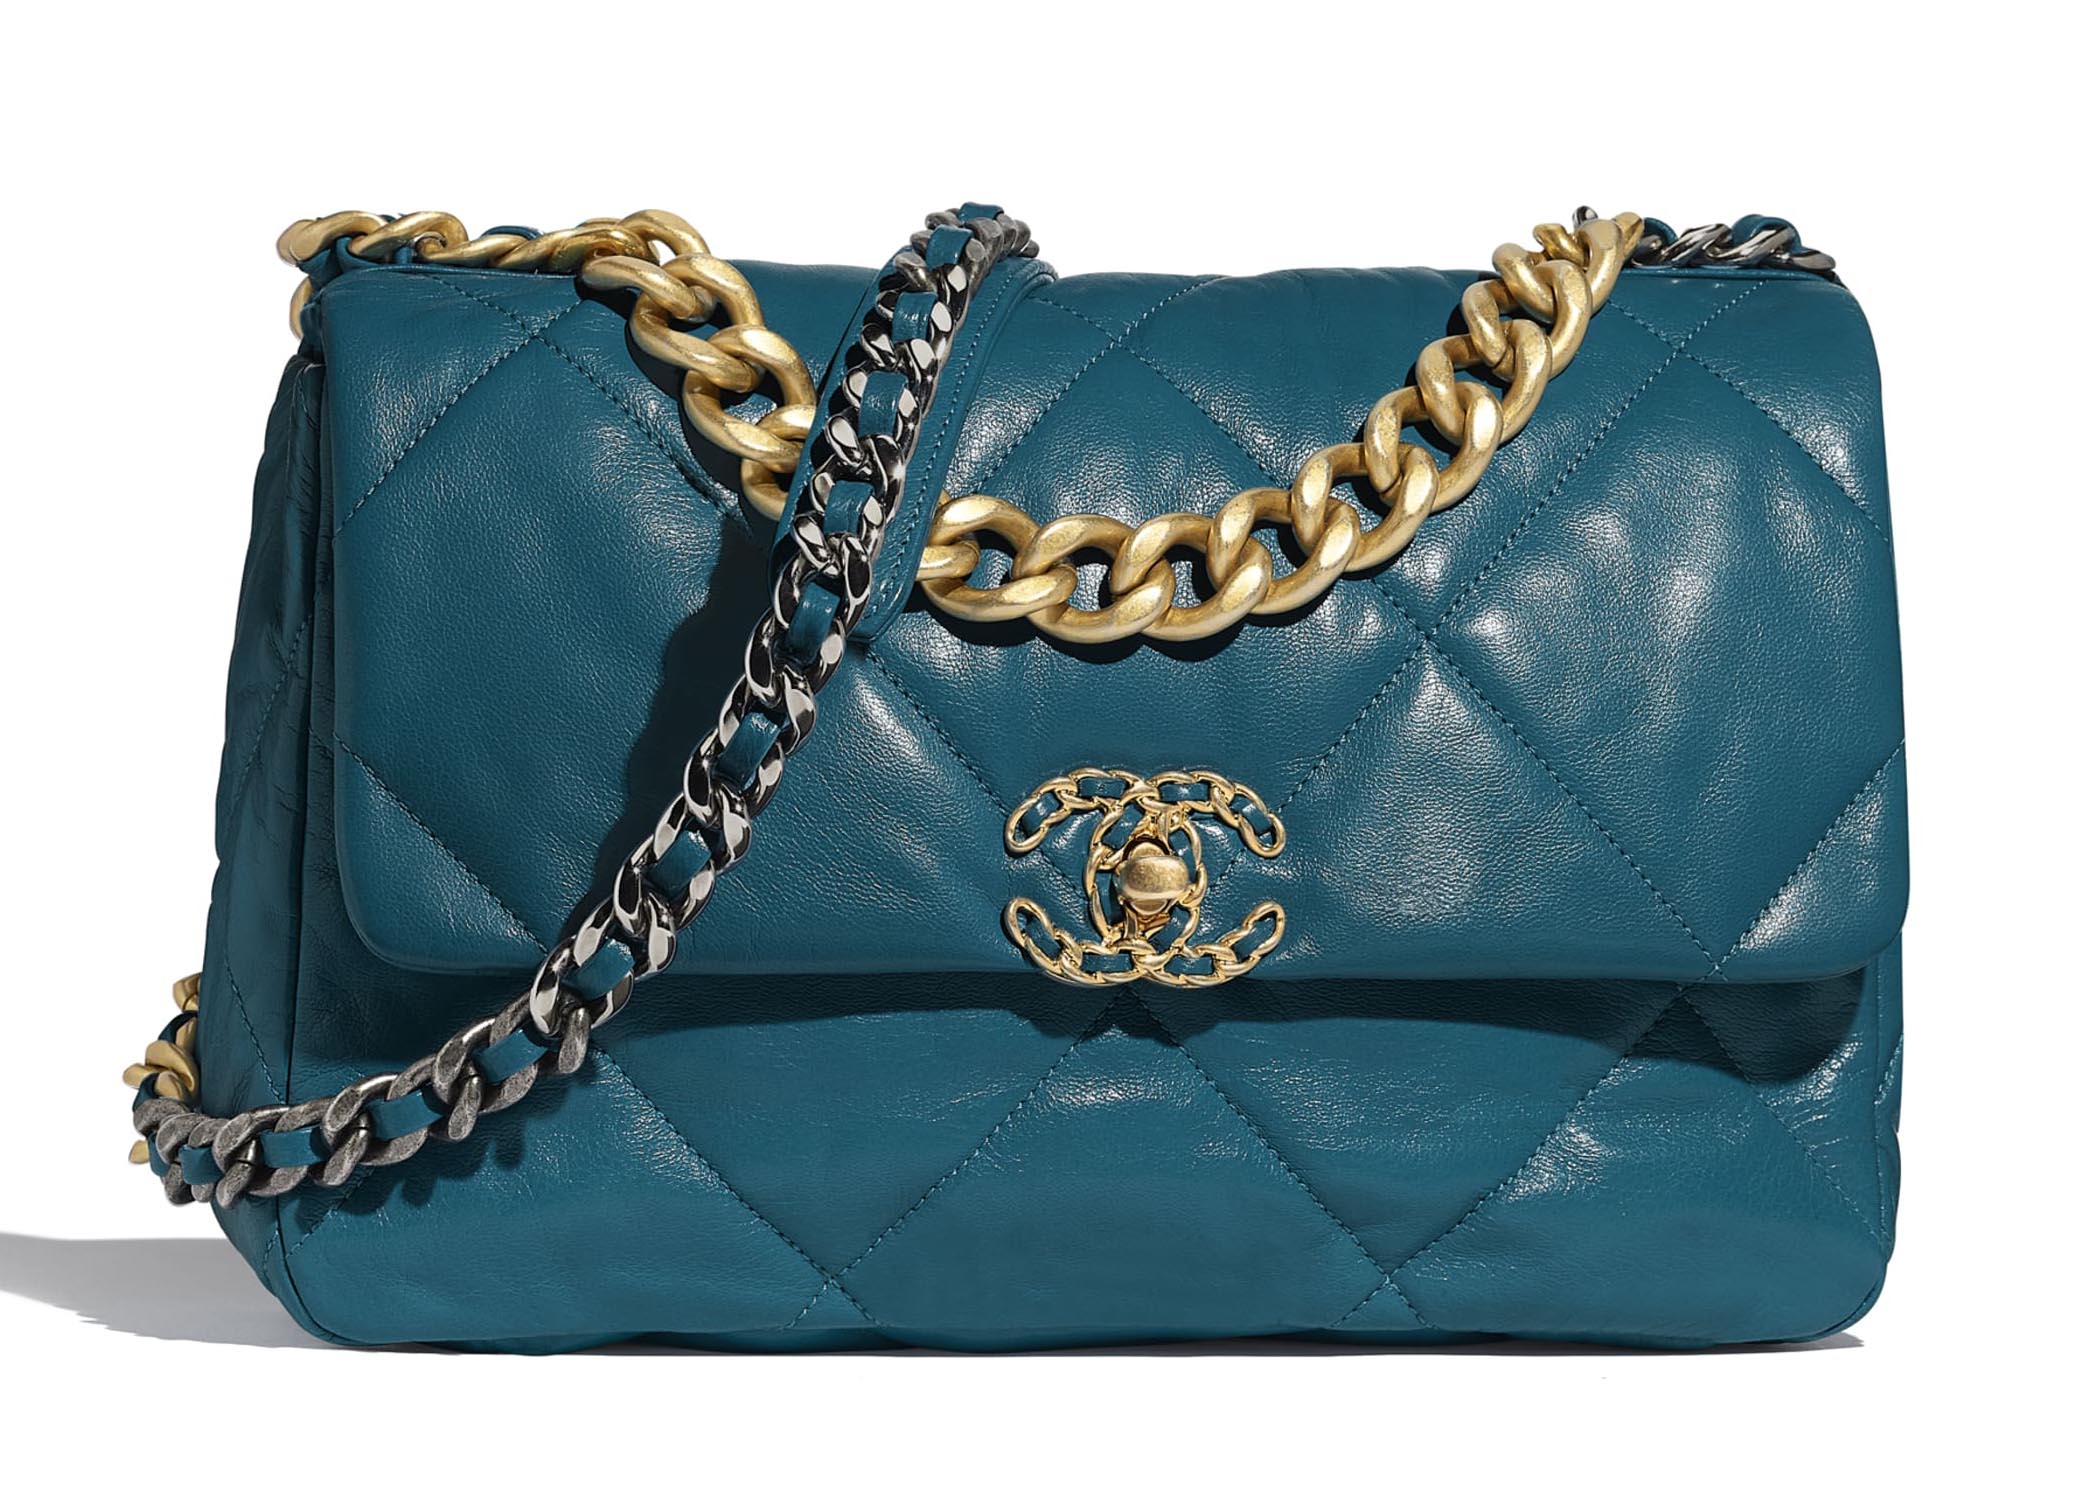 Preview Chanels SS21 Collection of Small Leather Goods  Small leather  goods Leather Chanel boutique